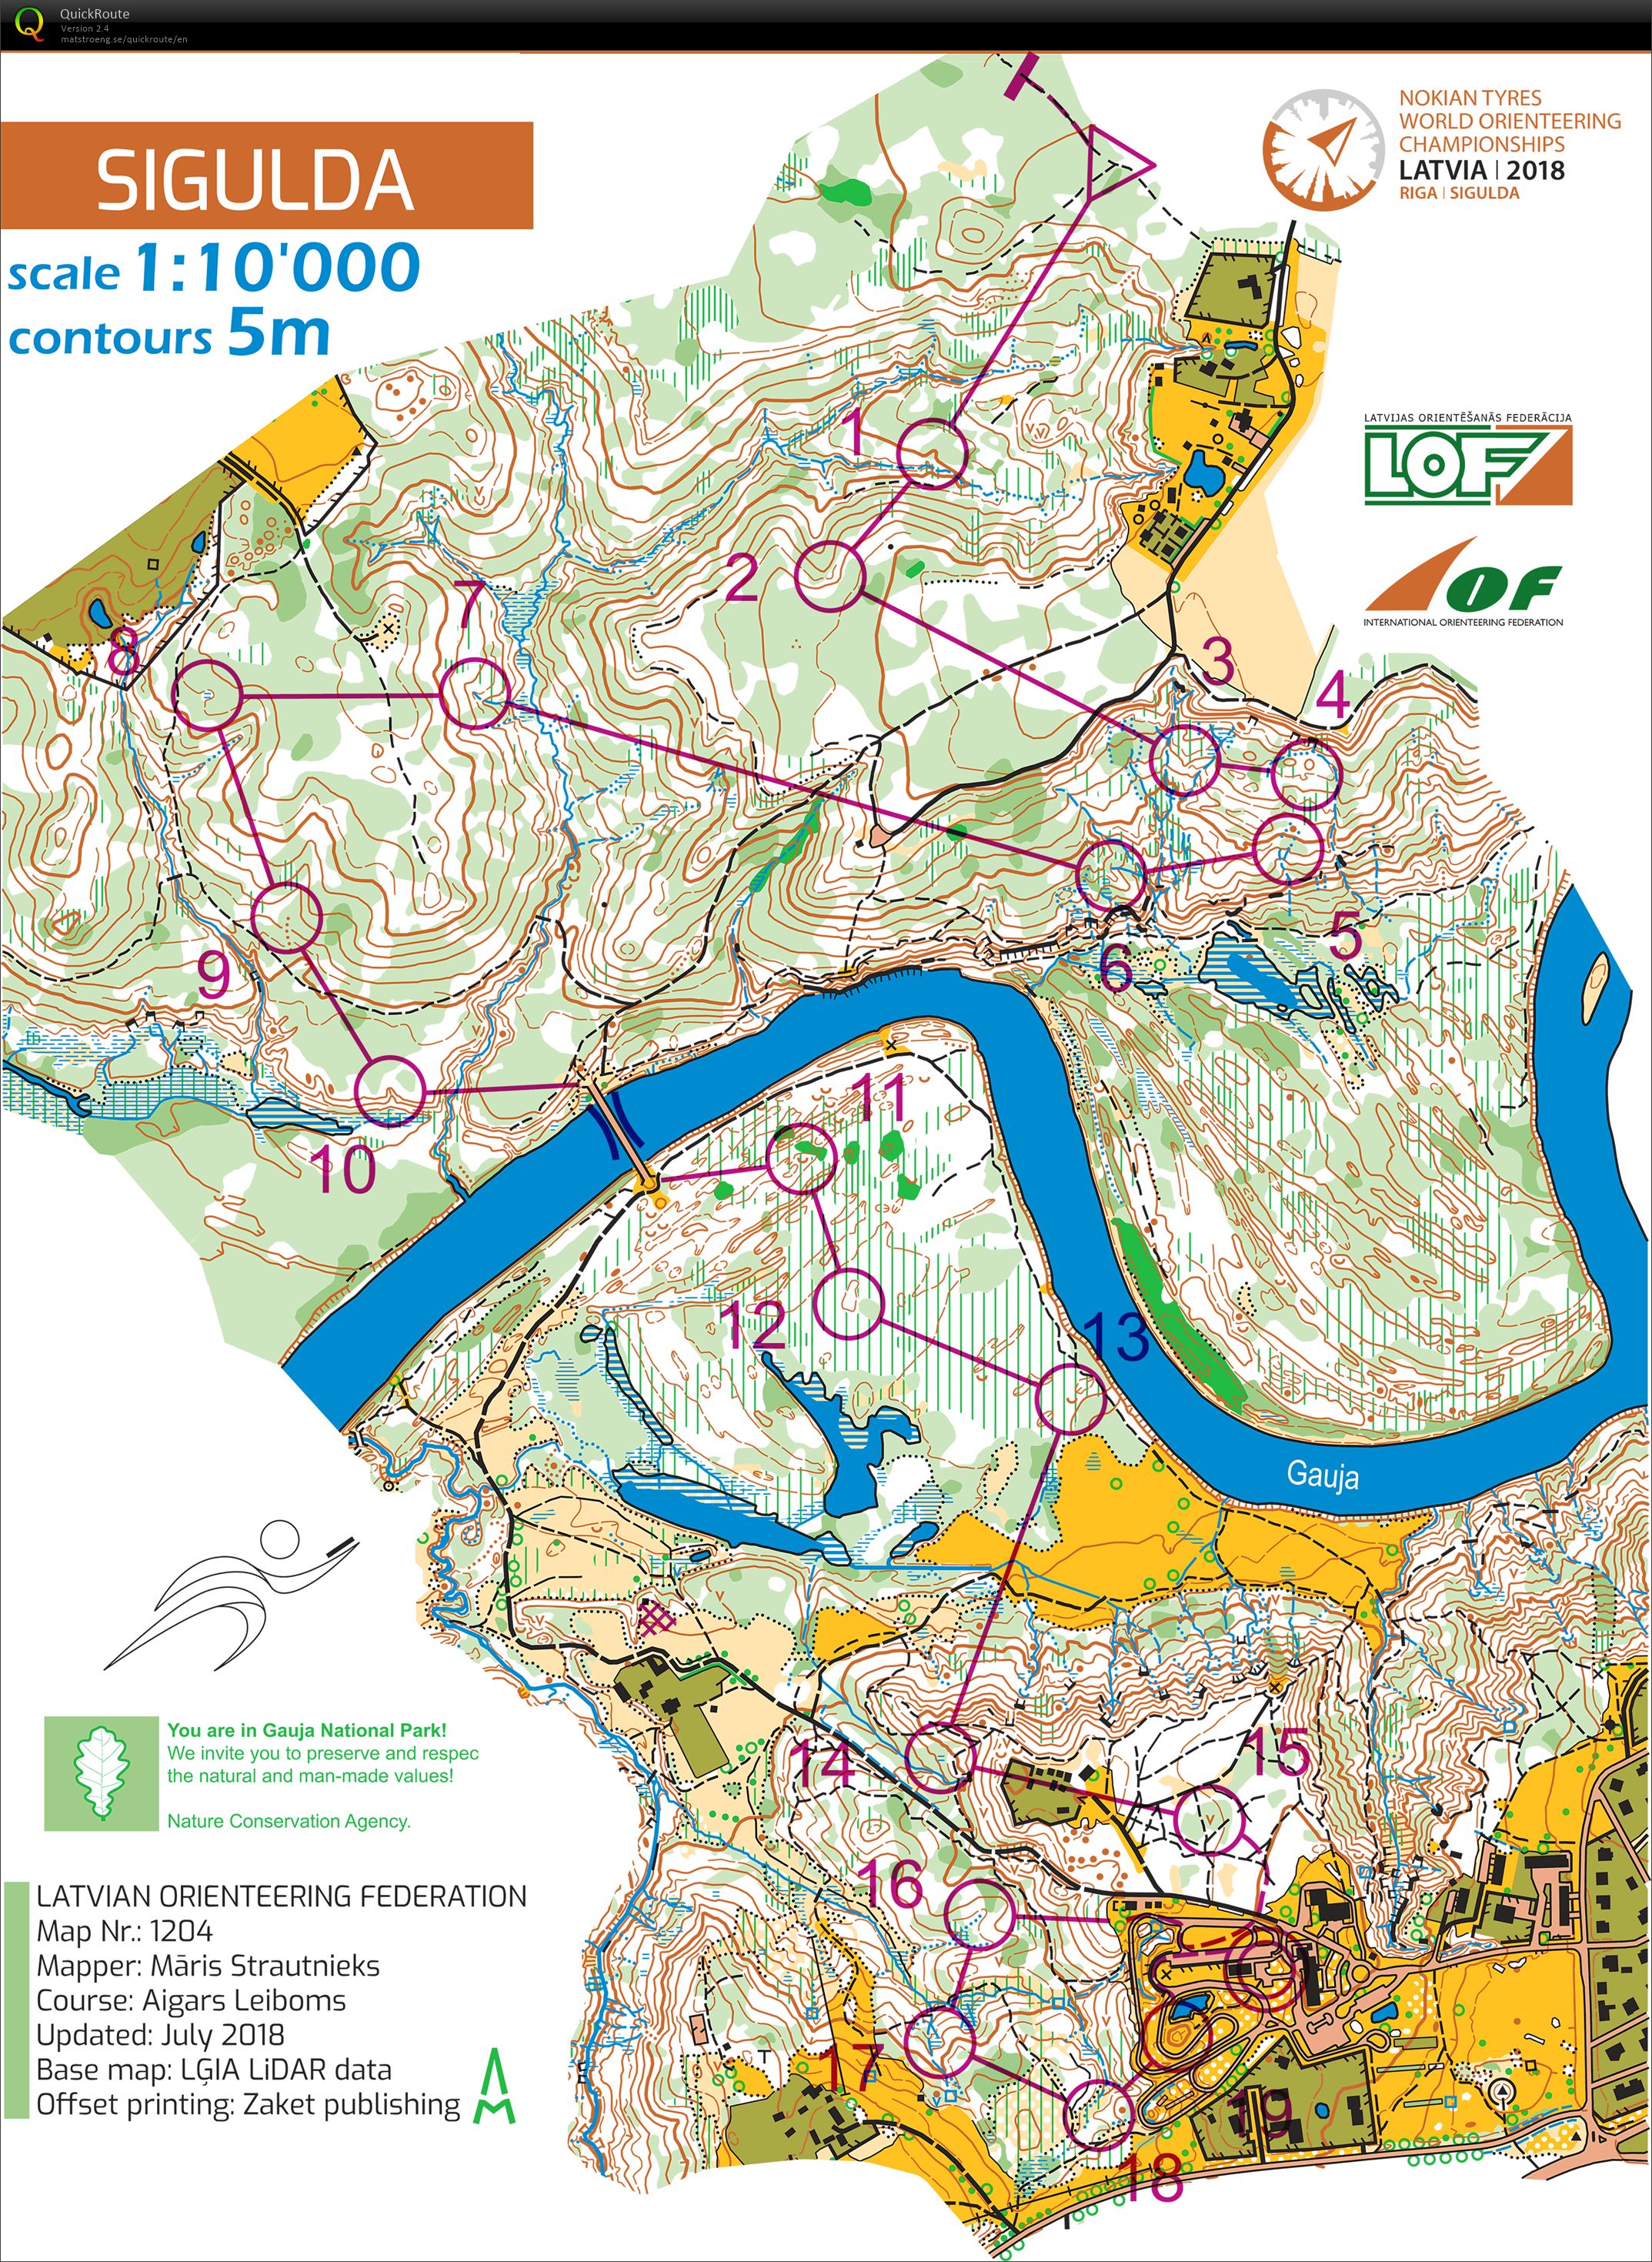 WOC 2018 Middle (07.08.2018)